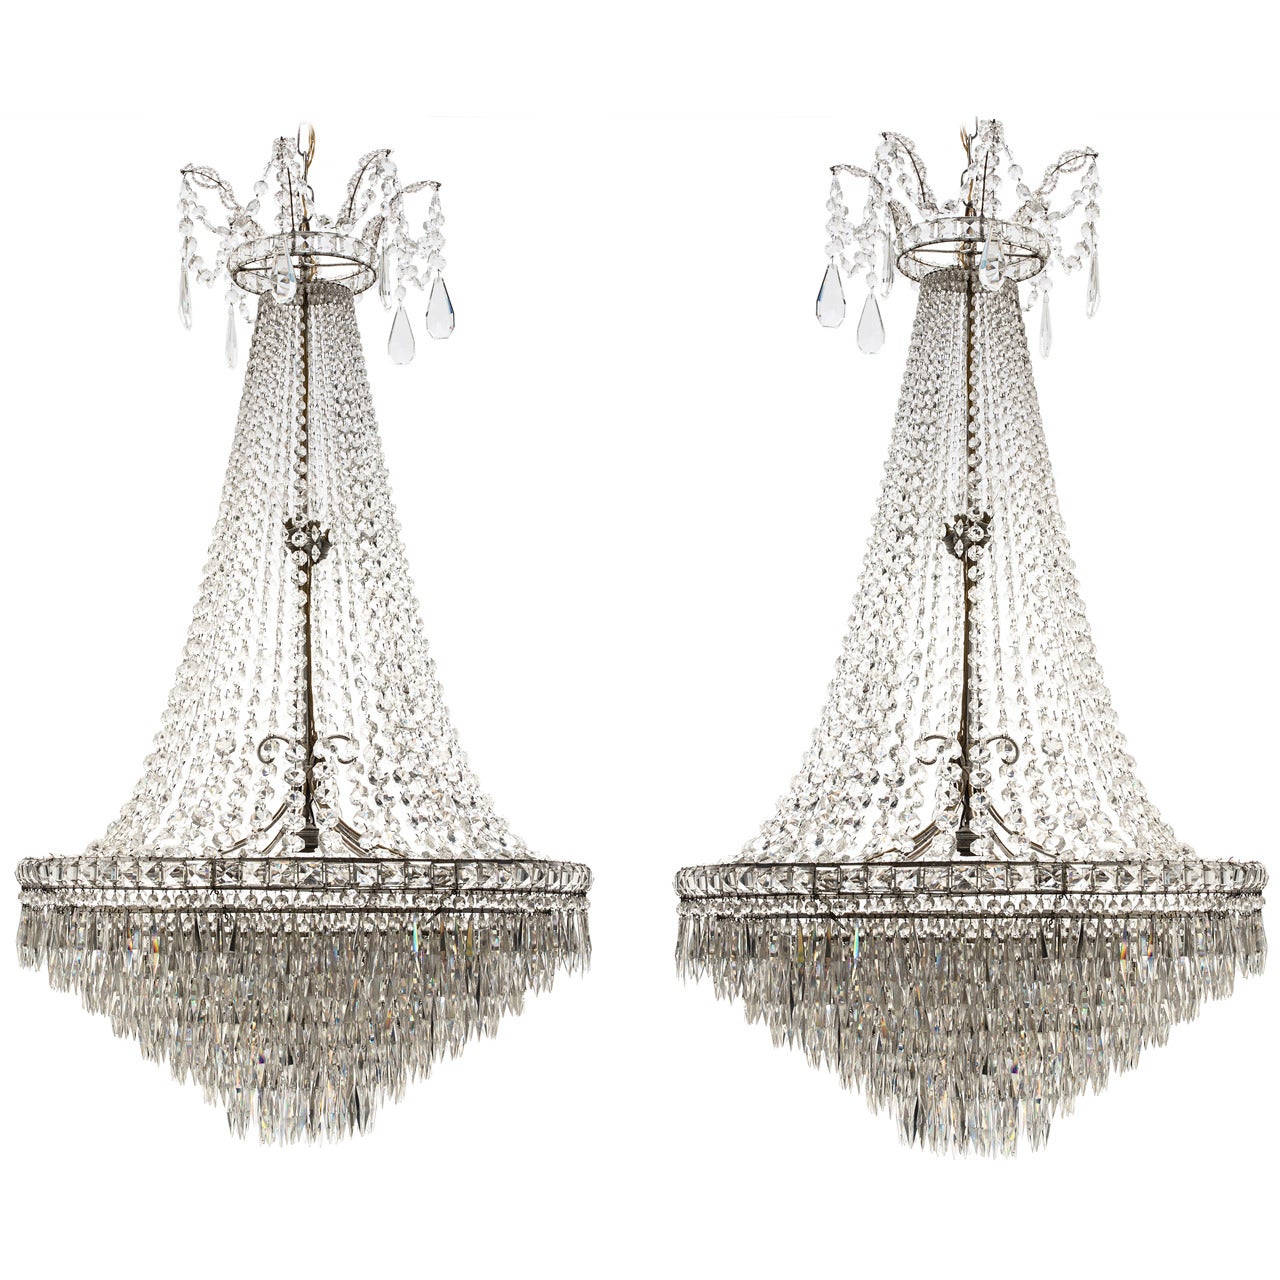 Pair of Baltic Crystal and Silvered Bronze, Tent Form Chandeliers, circa 1900